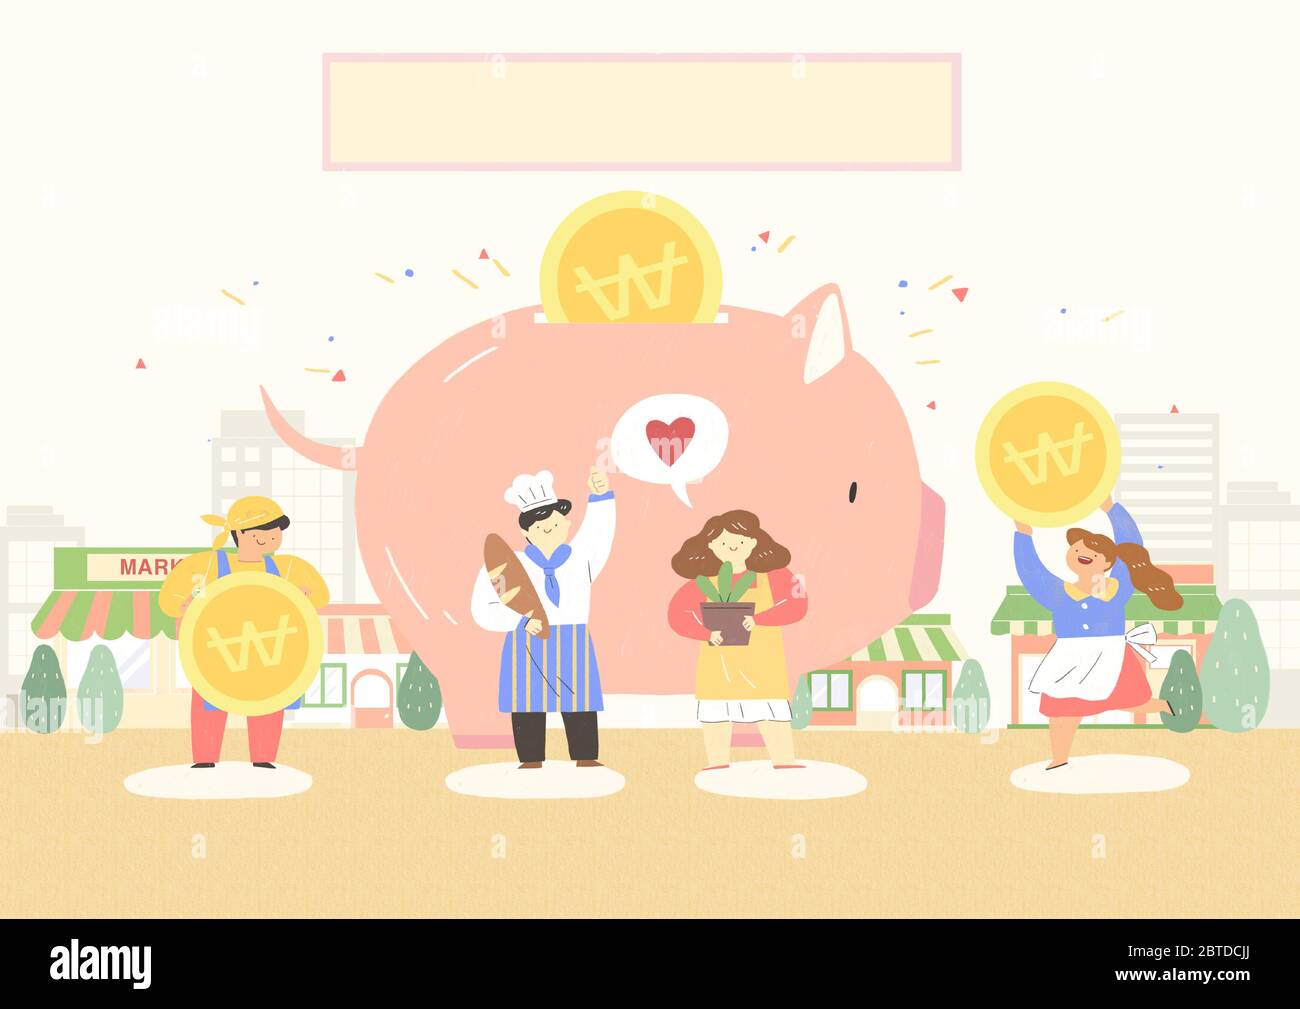 Local market conept, people selling or shopping illustration. 009 Stock Vector